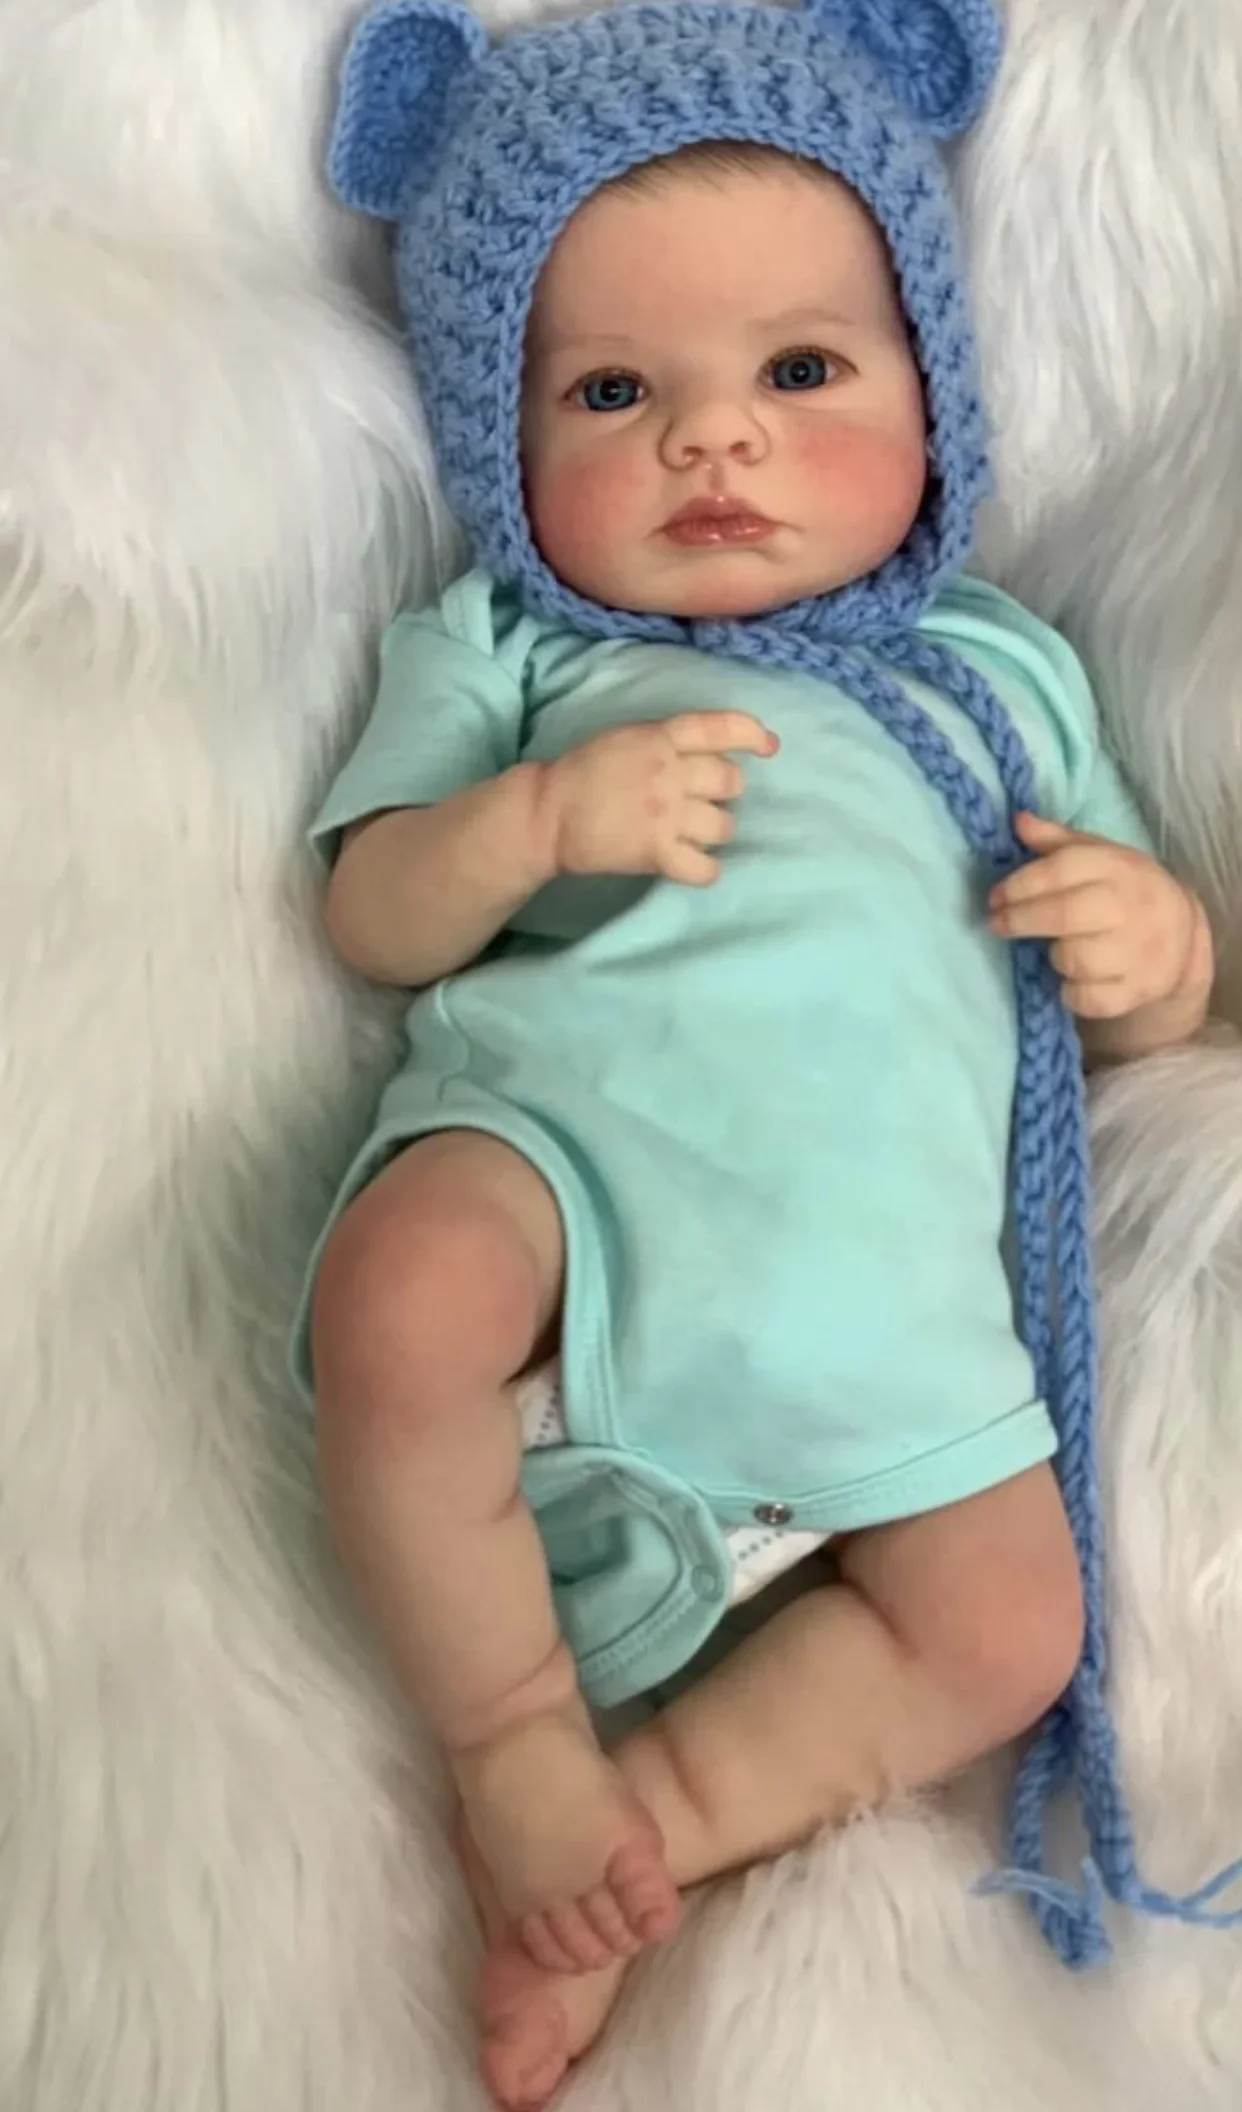 

NPK 19inch Newborn Baby Doll Handmade Lifelike Reborn Loulou Awake Soft Touch Cuddly Doll with 3D Painted Skin Visible Veins